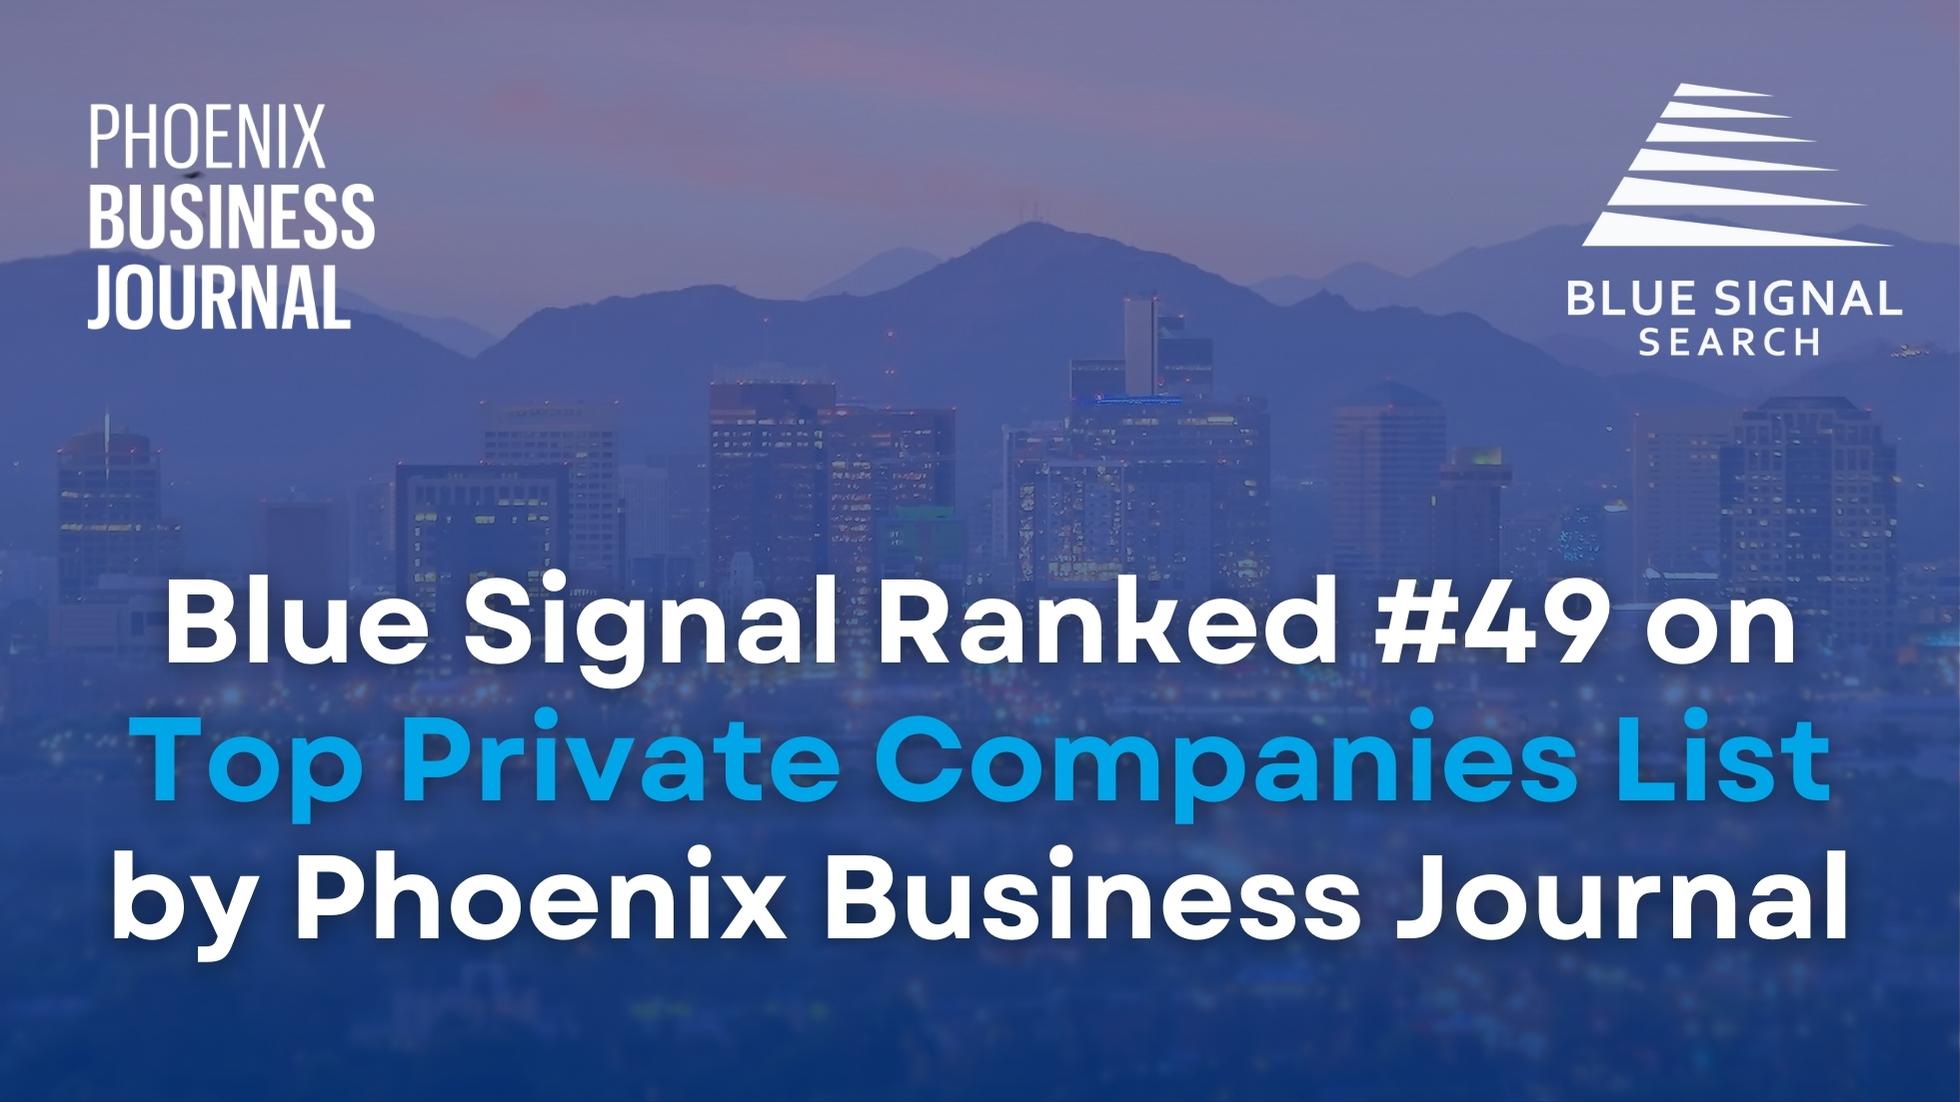 Blue Signal Search achieves the 49th spot on the Phoenix Business Journal's Top Private Companies list, with a backdrop of Phoenix cityscape at dusk.